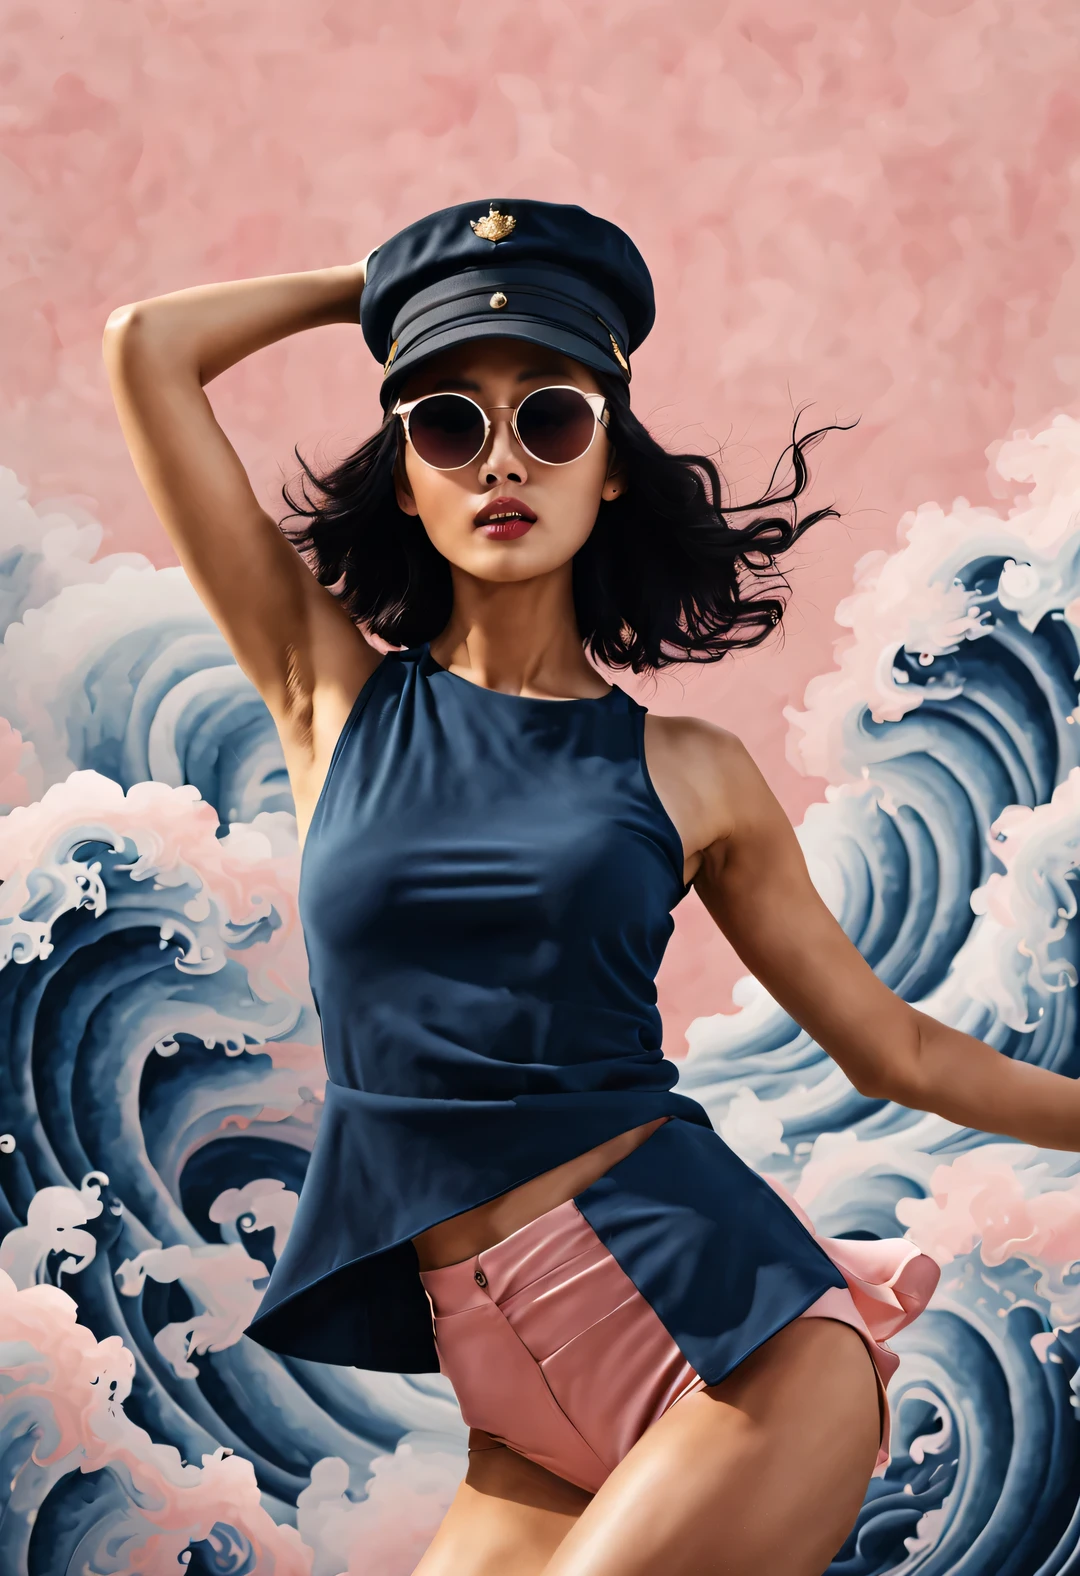 (Modern art dance simple poster design), (Half-length close-up), (Beautiful Chinese girl dancing in the air), (Wearing sunglasses and a hat: 1.2), (Soft pink contrasts with deep navy blue), Showing the warmth and depth of winter, Both fashionable and with a touch of gentle feminine charm. Wear modern and stylish winter fashion, slim waist, high nose bridge, Head up posture, sad yet beautiful, slim figure, Exquisite facial features, correct finger,
background: briefcase dance, fog illustration, ink painting, black hair, Princess curly long hair, Proud, Surrealism, contemporary art photography, action painting illustration, abstract expressionism, Pixar, depth of field, motion blur, backlight, Falling shadows, Vignetting, Elevation viewing angle, Sony FE General Manager, ultra high definition, masterpiece, Accuracy, textured skin, Super details, high detail, high quality, Award-winning, best quality, Level, 16k, Photographed from a bottom-up perspective,